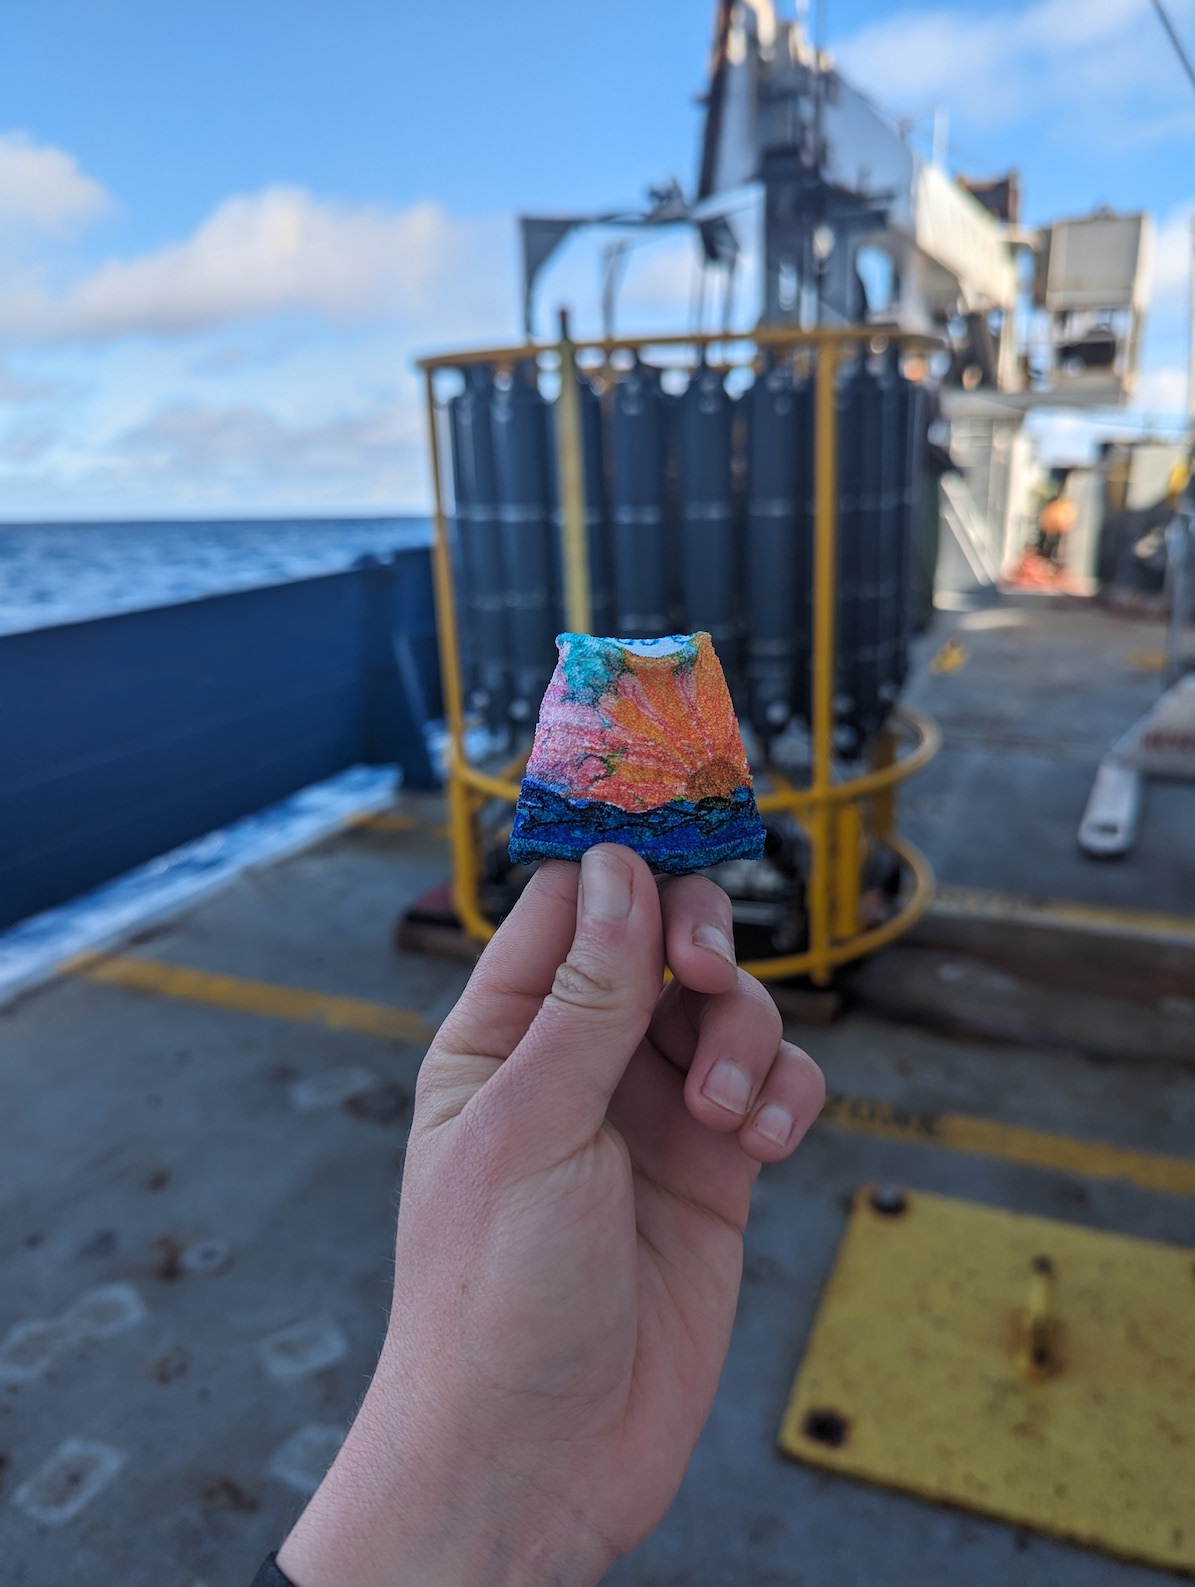 shrunken cup held up in front of the CTD on deck